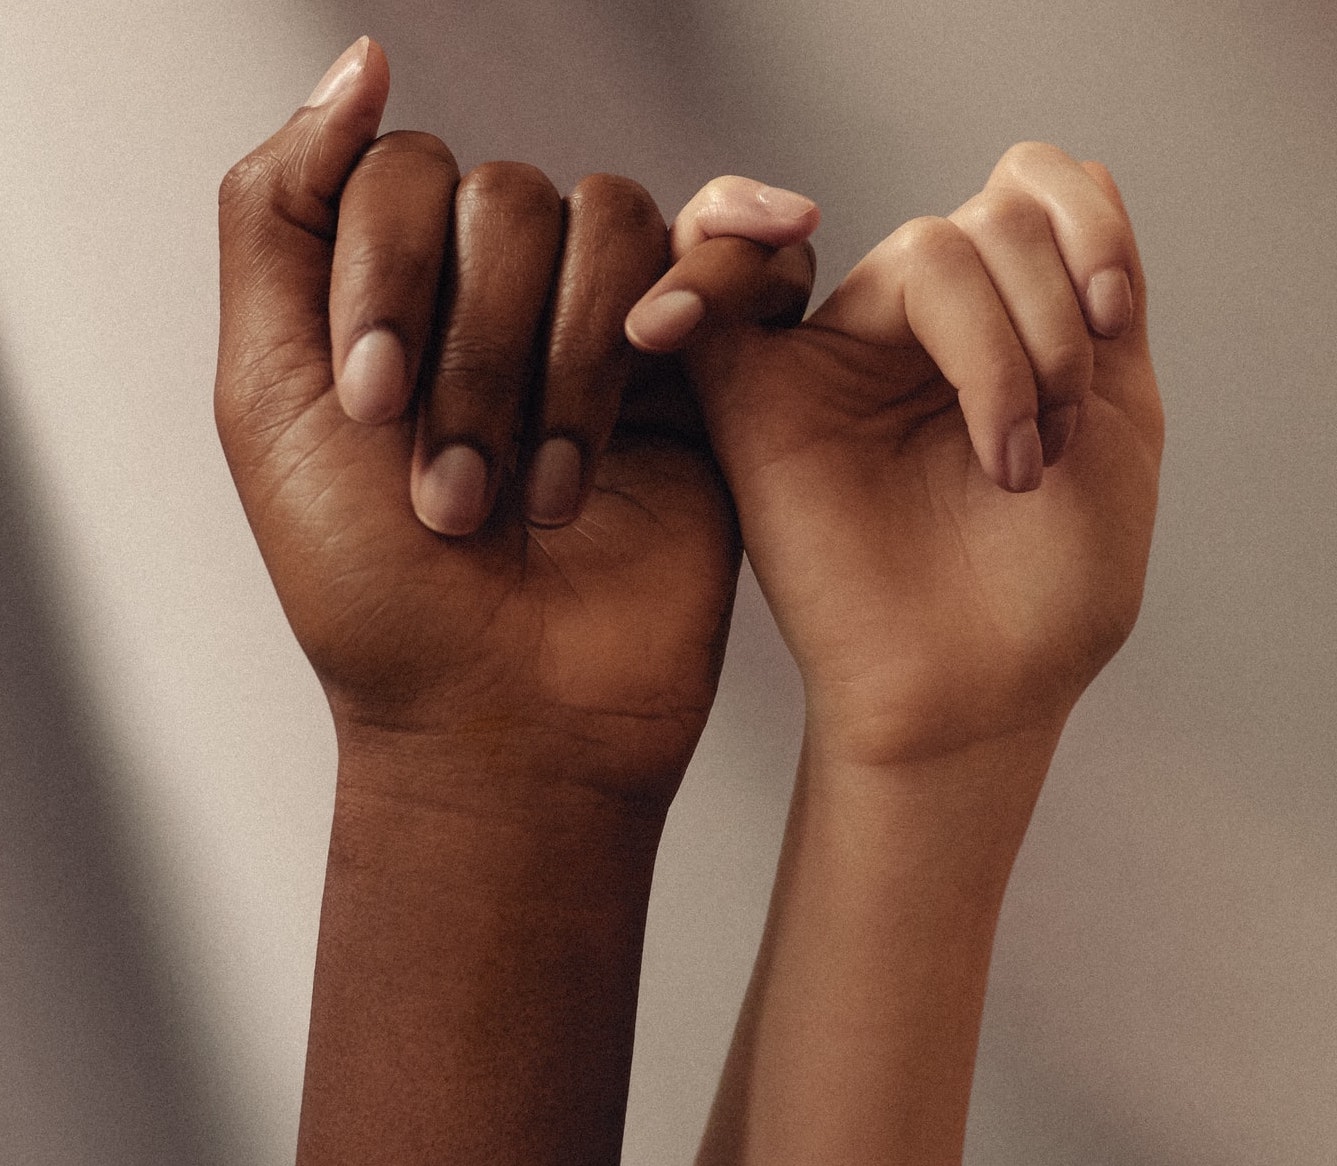 Two hands of different races pinky promise to represent solidarity and support within a workplace